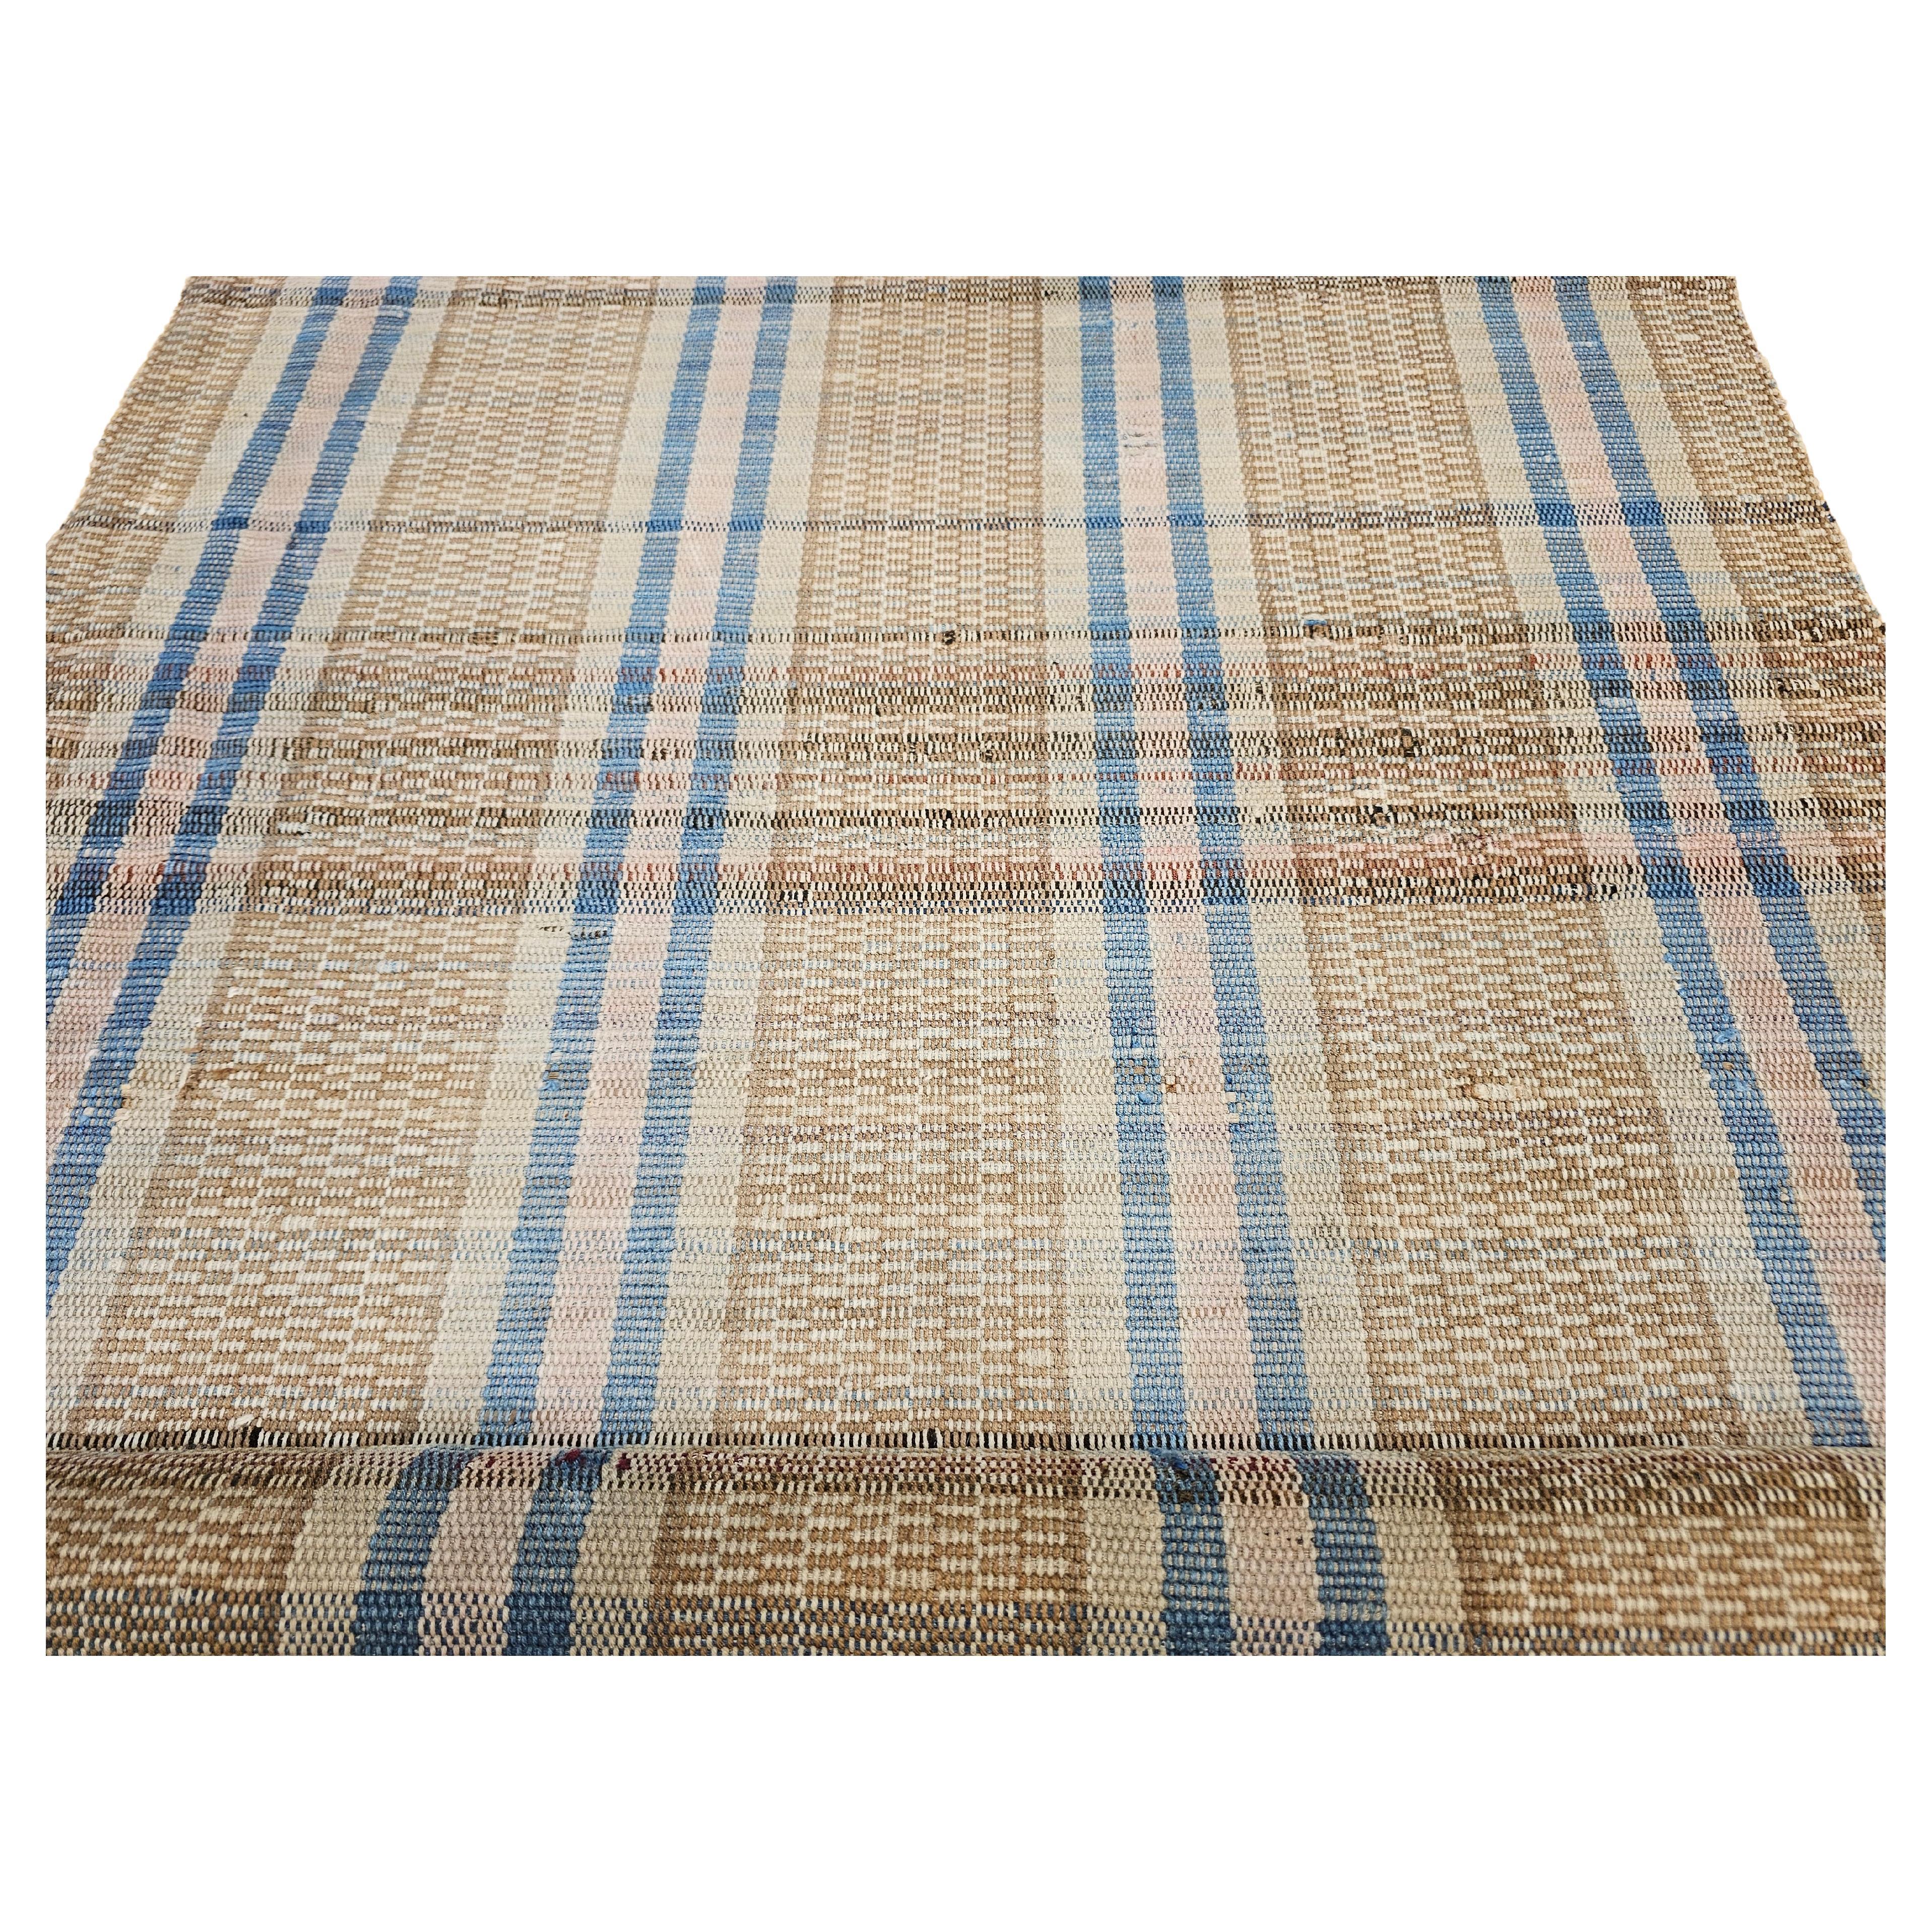 Vintage Hand-Woven American Amish Rag Runner in Pale Blue, Pink, Wheat, Caramel For Sale